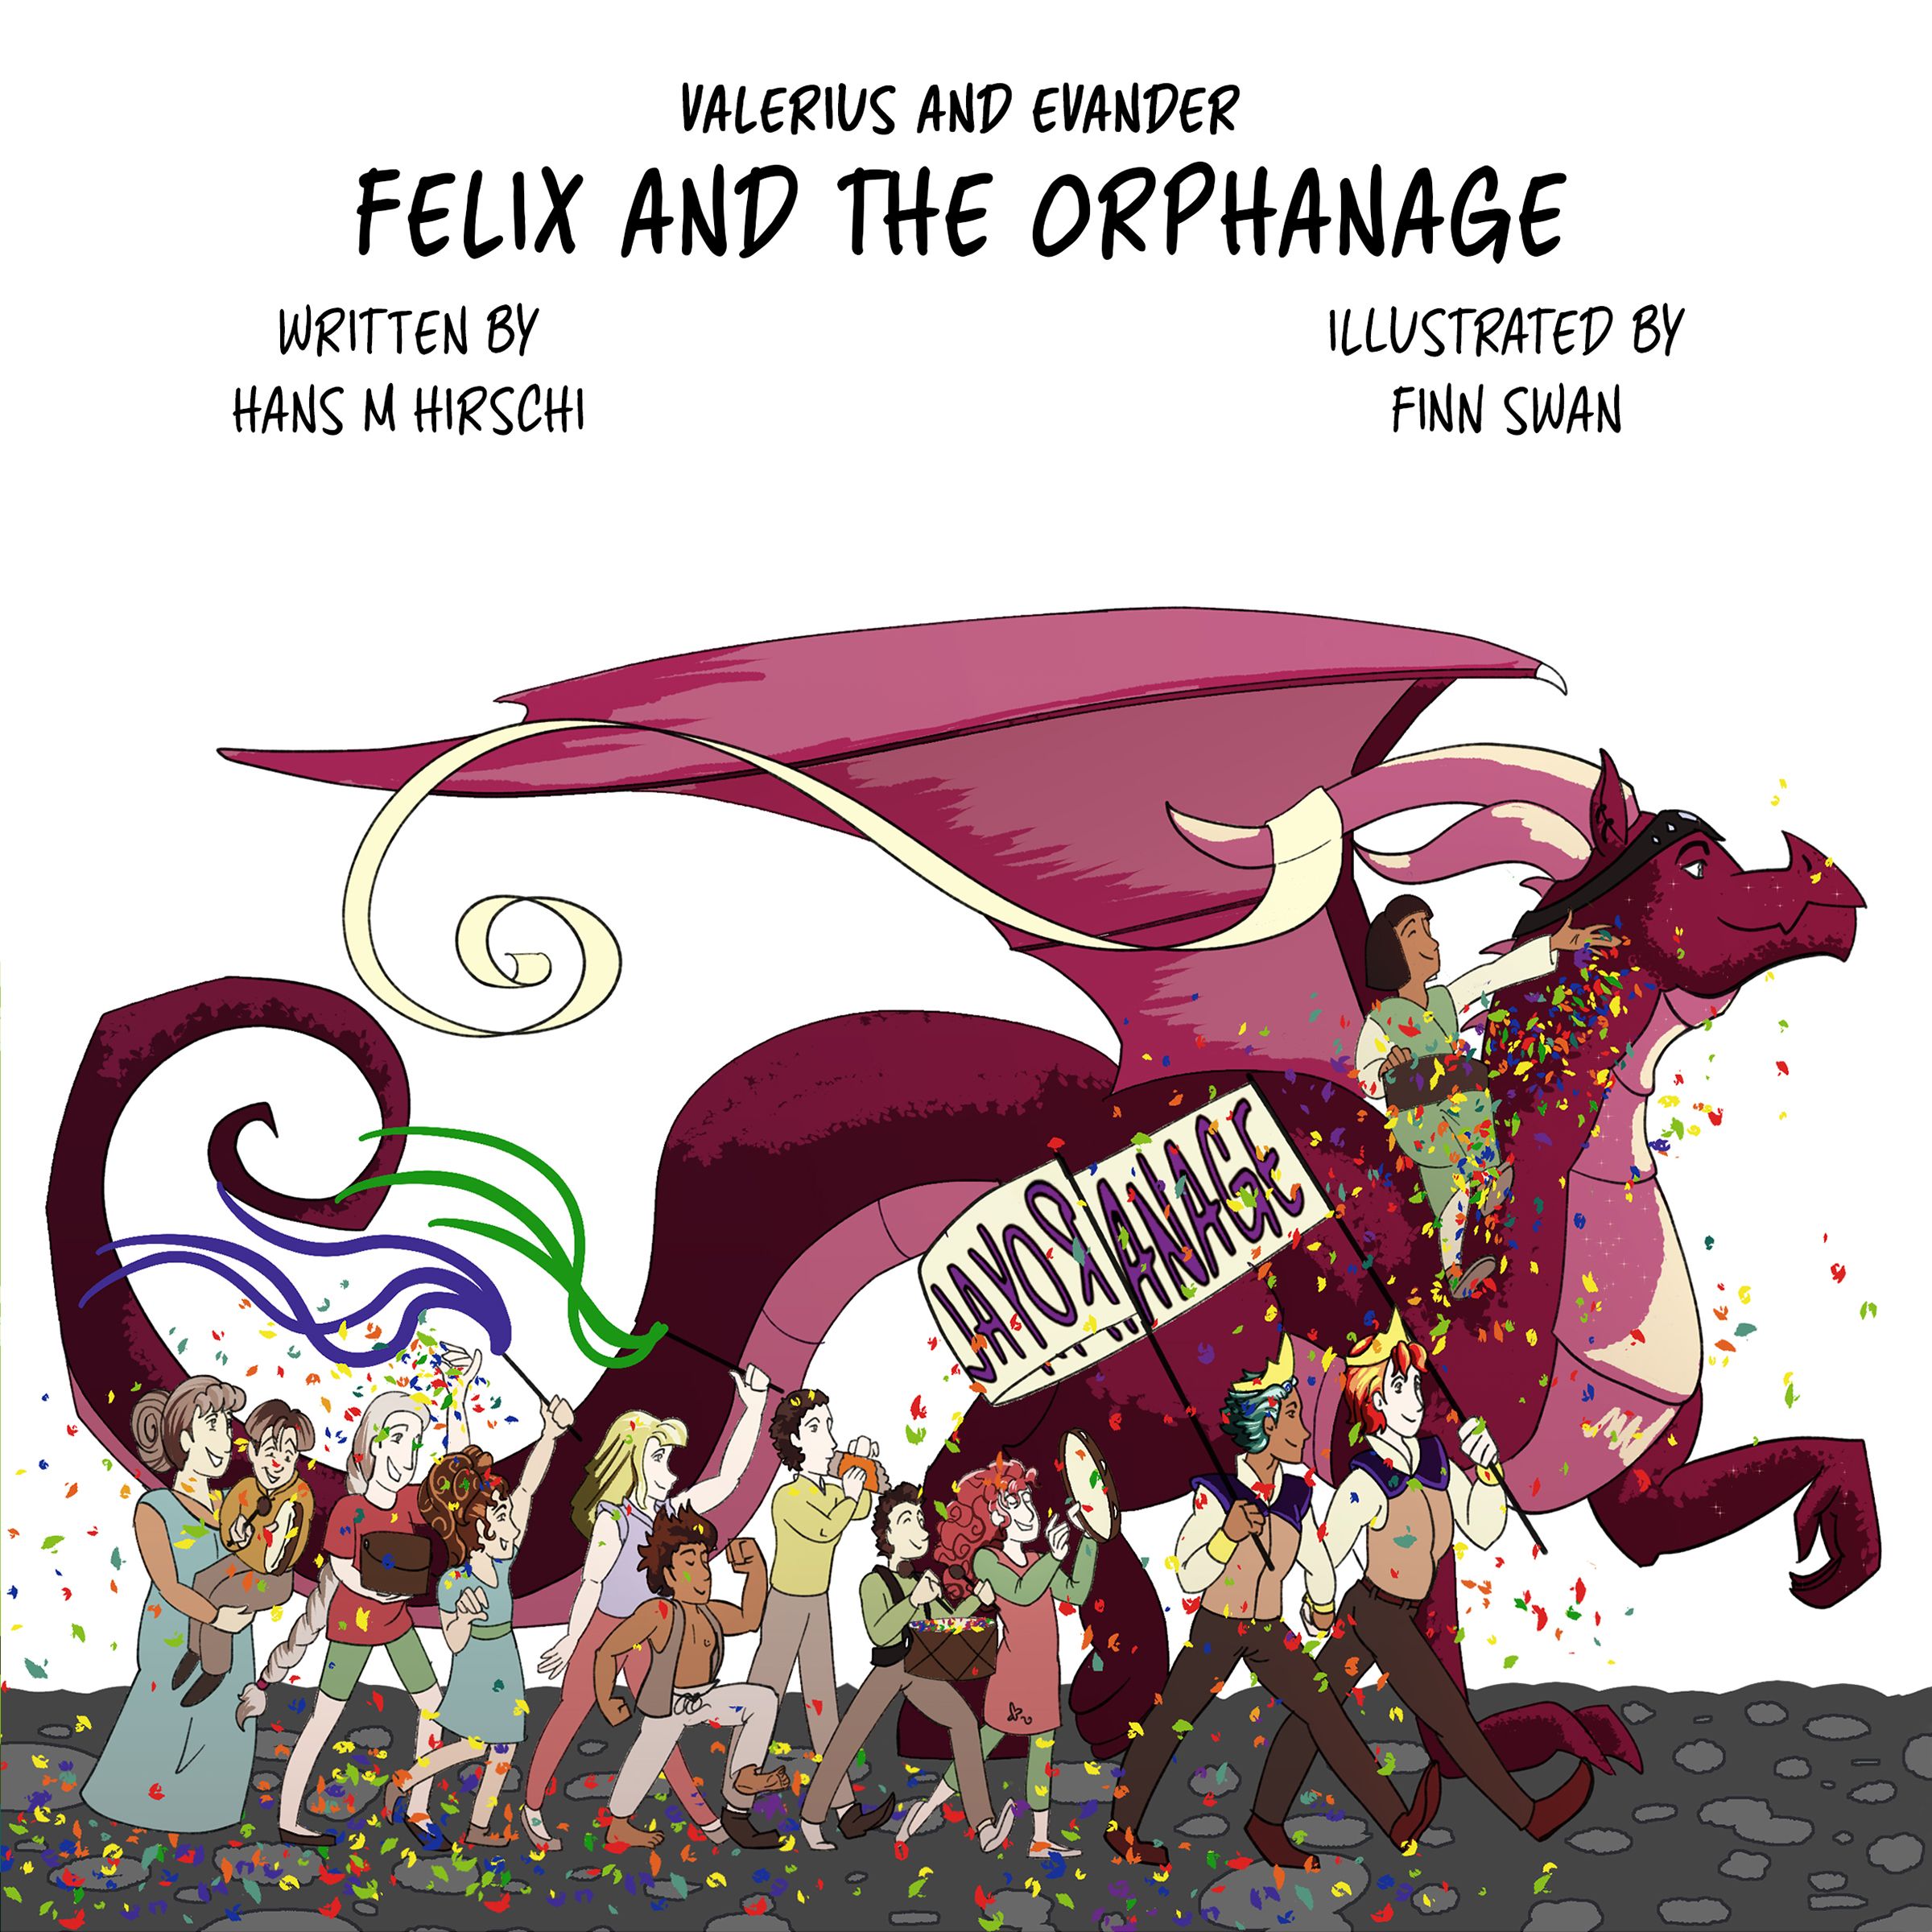 Valerius and Evander – Felix and the Orphanage, eBook by Hans M Hirschi